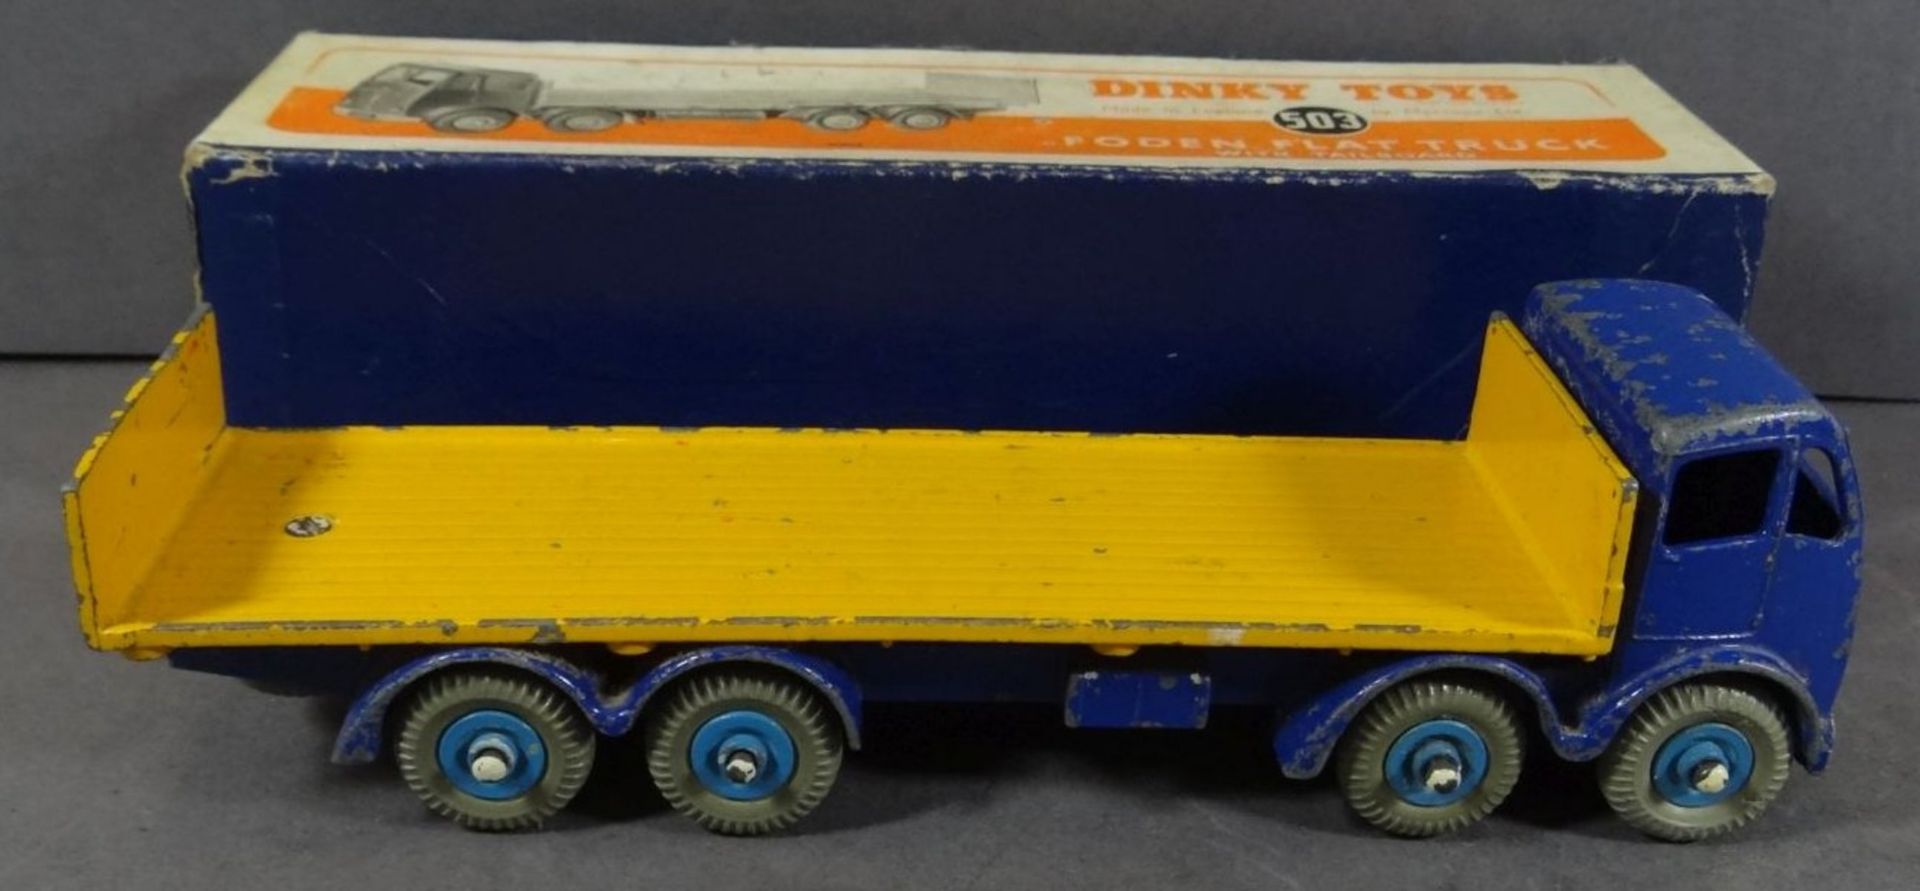 Dinky Toys 503 Foden Flat Truck in OVP, bespielte Erhaltung - Image 4 of 6